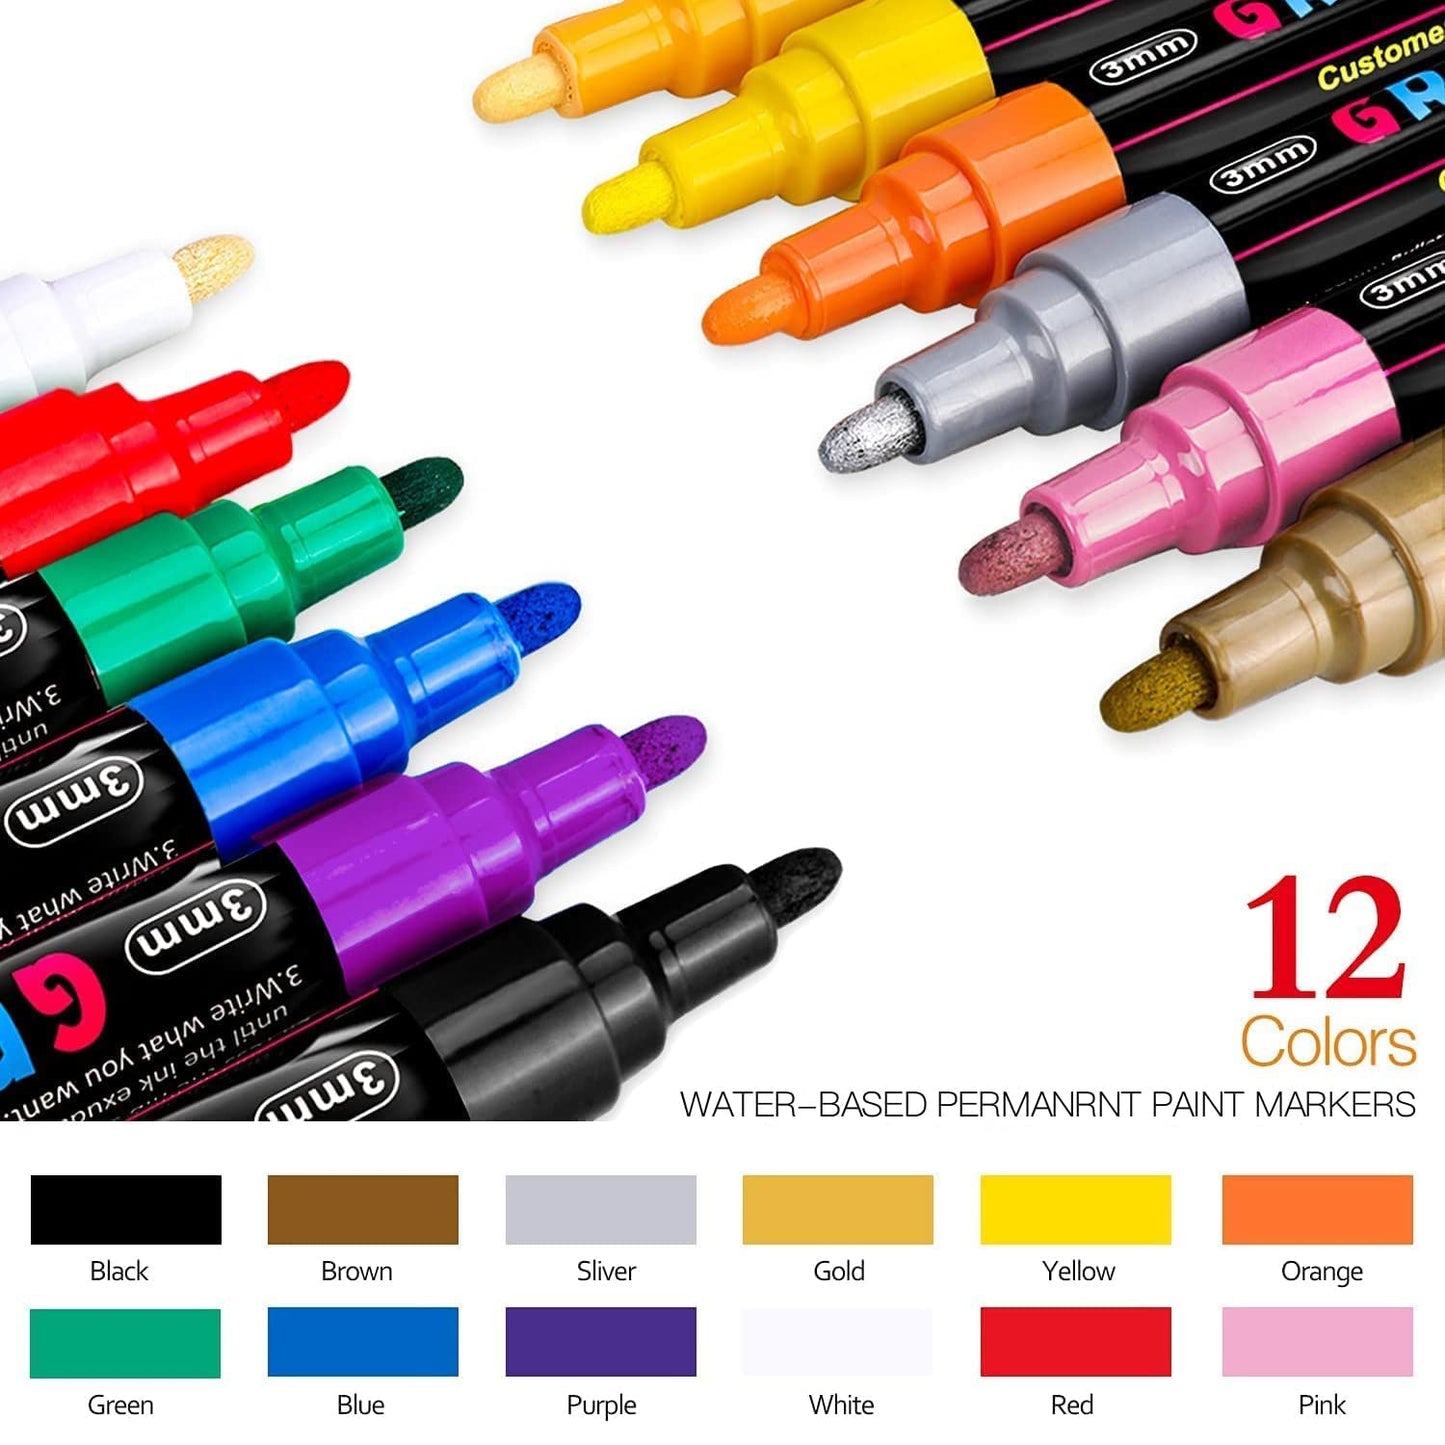 Premium Acrylic Paint Marker 0.7mm Fine Point and 2.0mm Middle Tip Acrylic Paint Pen Marker